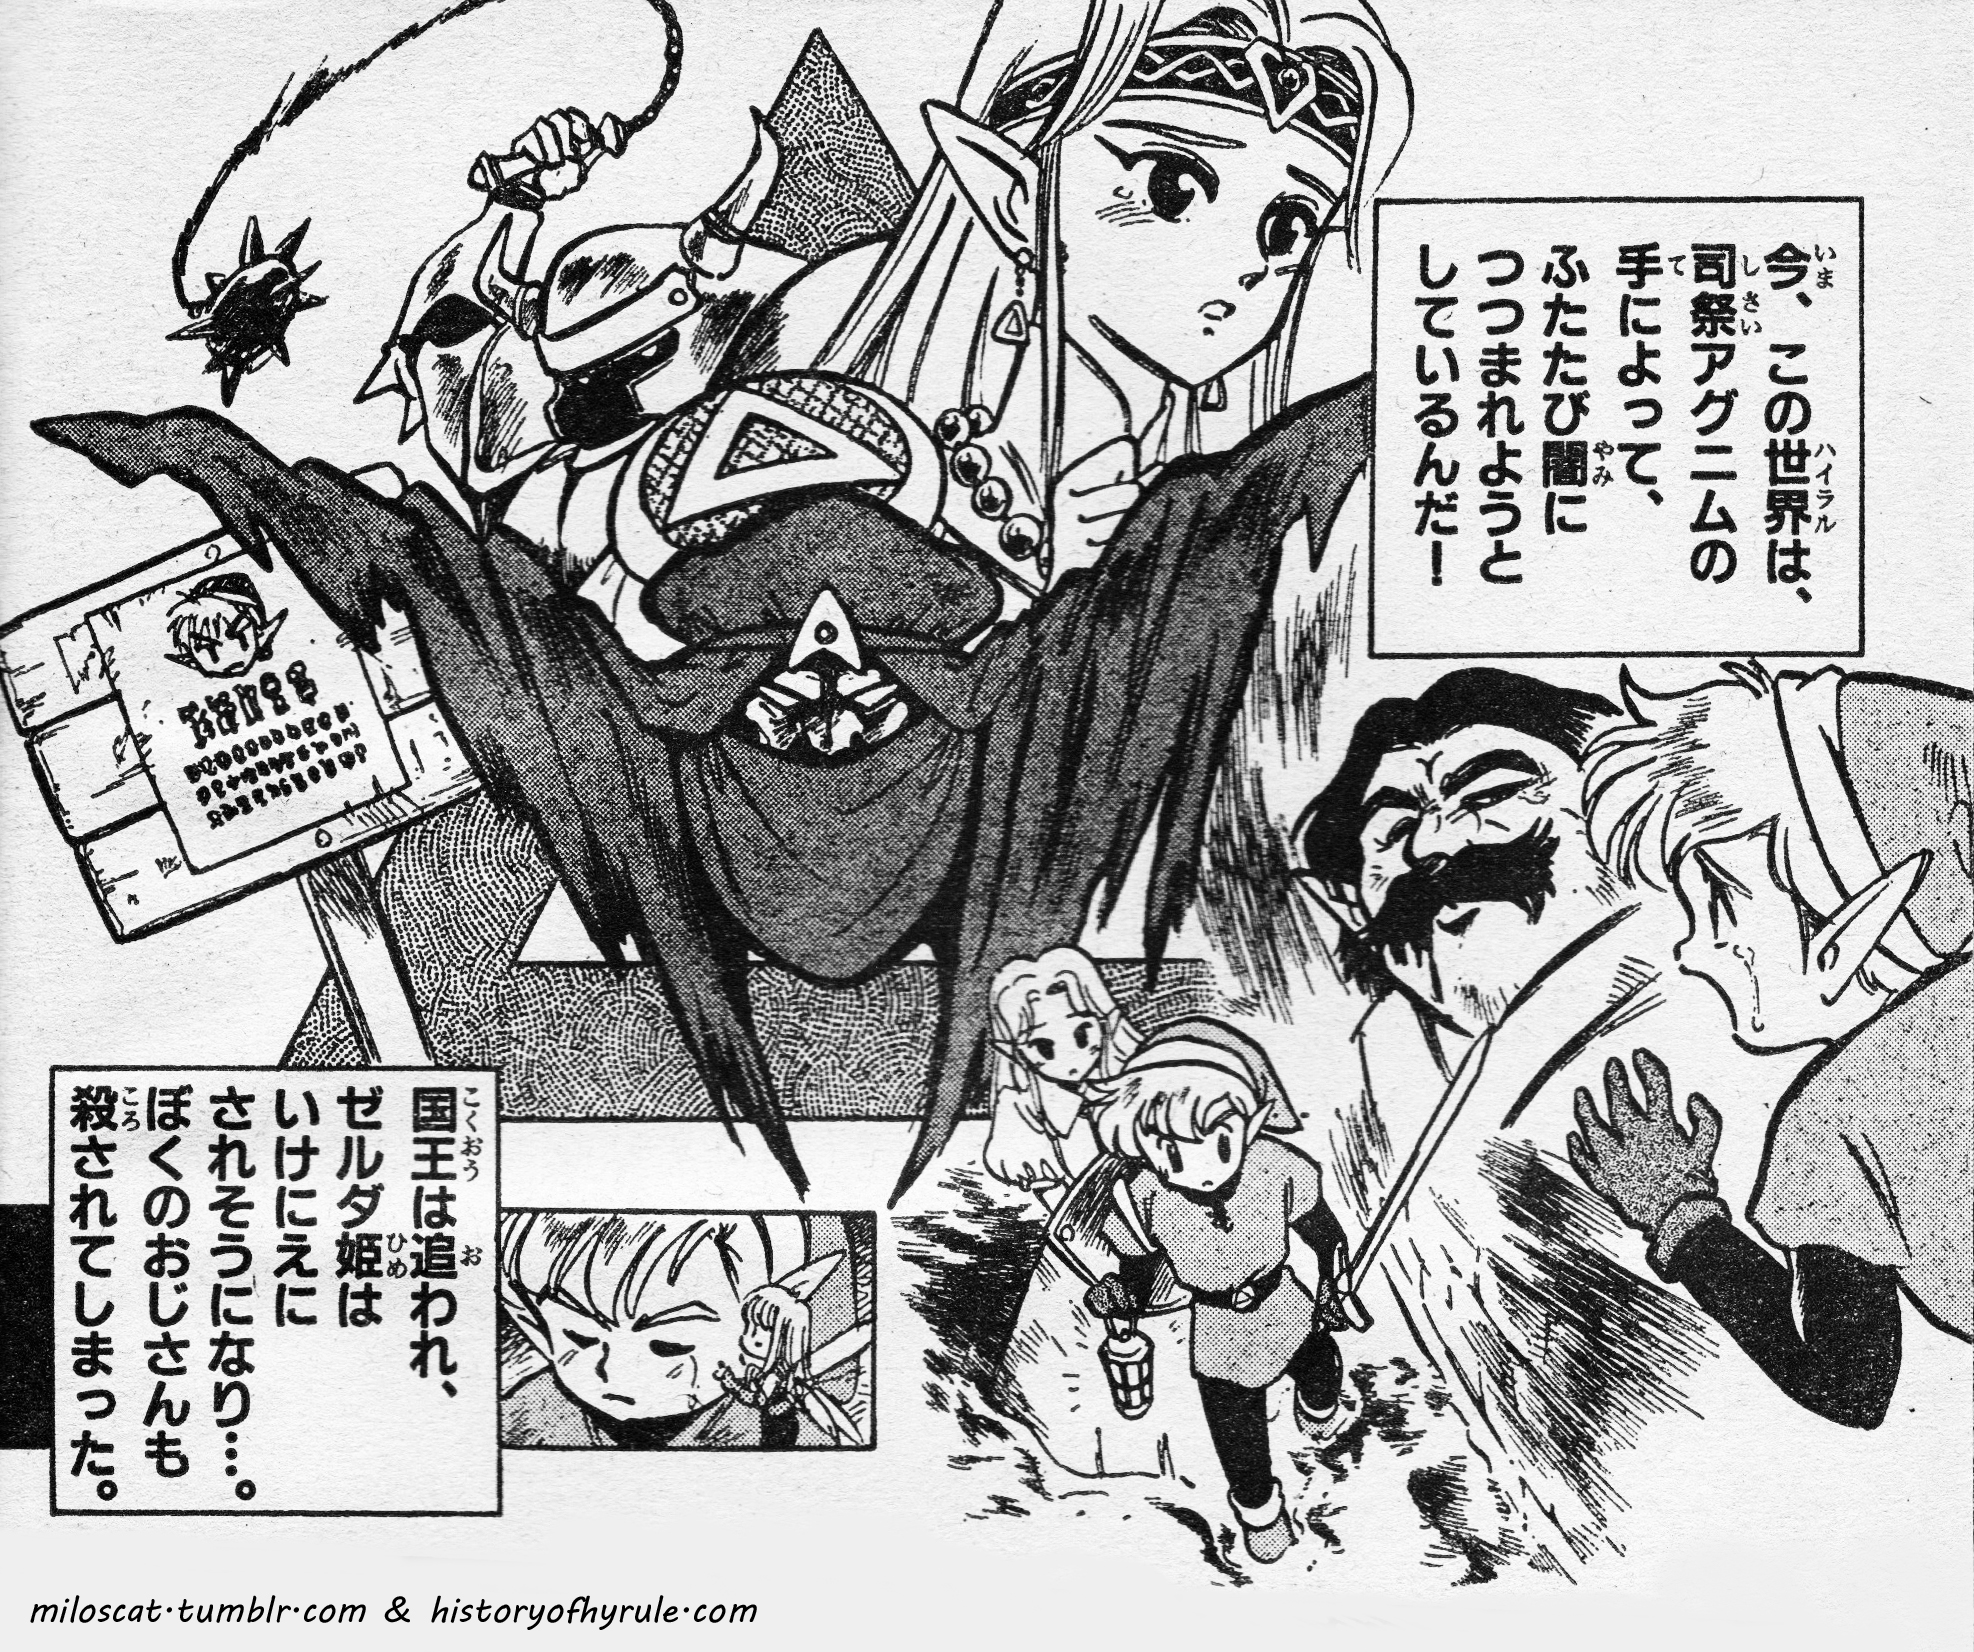 A Link To The Past Manga History of Hyrule (Zelda Archivist) ♿🇵🇸✊🏿🏳️‍⚧️ on X: "I took a detour  from working on HoH's official art gallery to clean this super cute Link to  the Past manga that @MiloScat informed